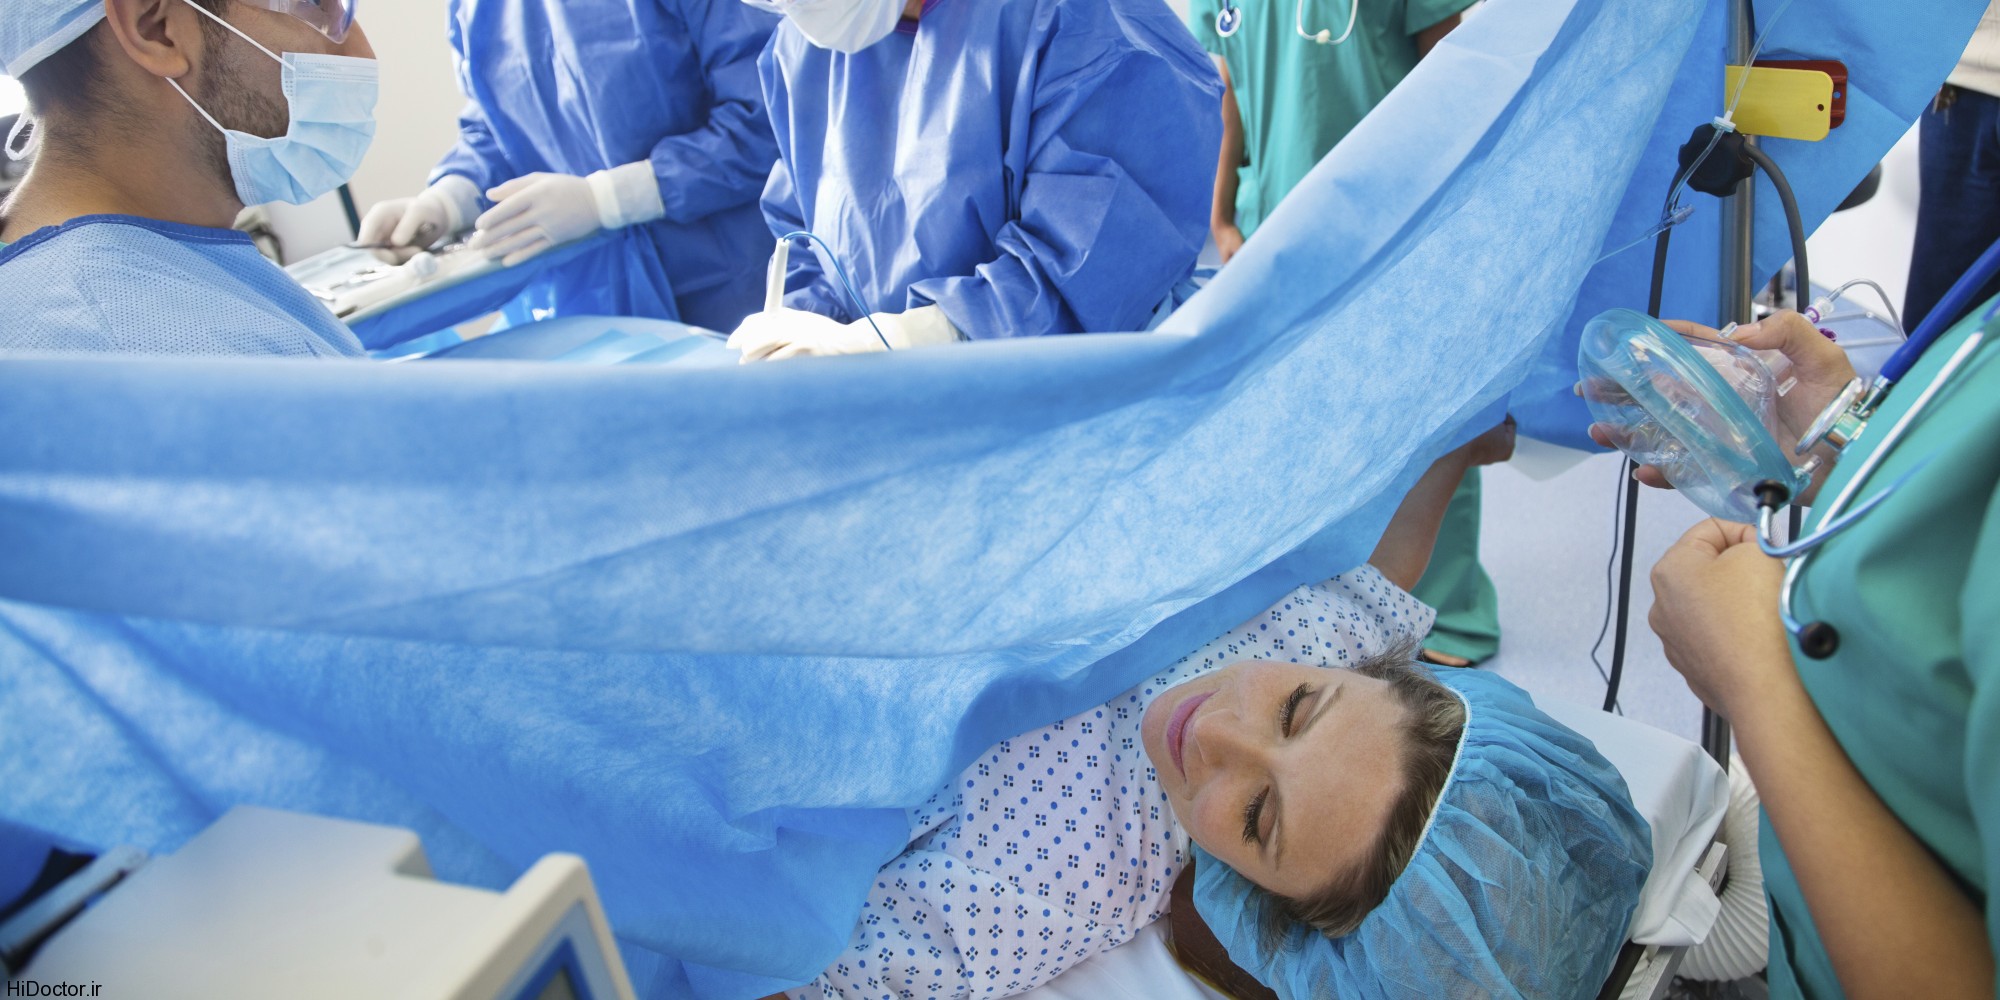 Surgical team performing Caesarean section on pregnant woman